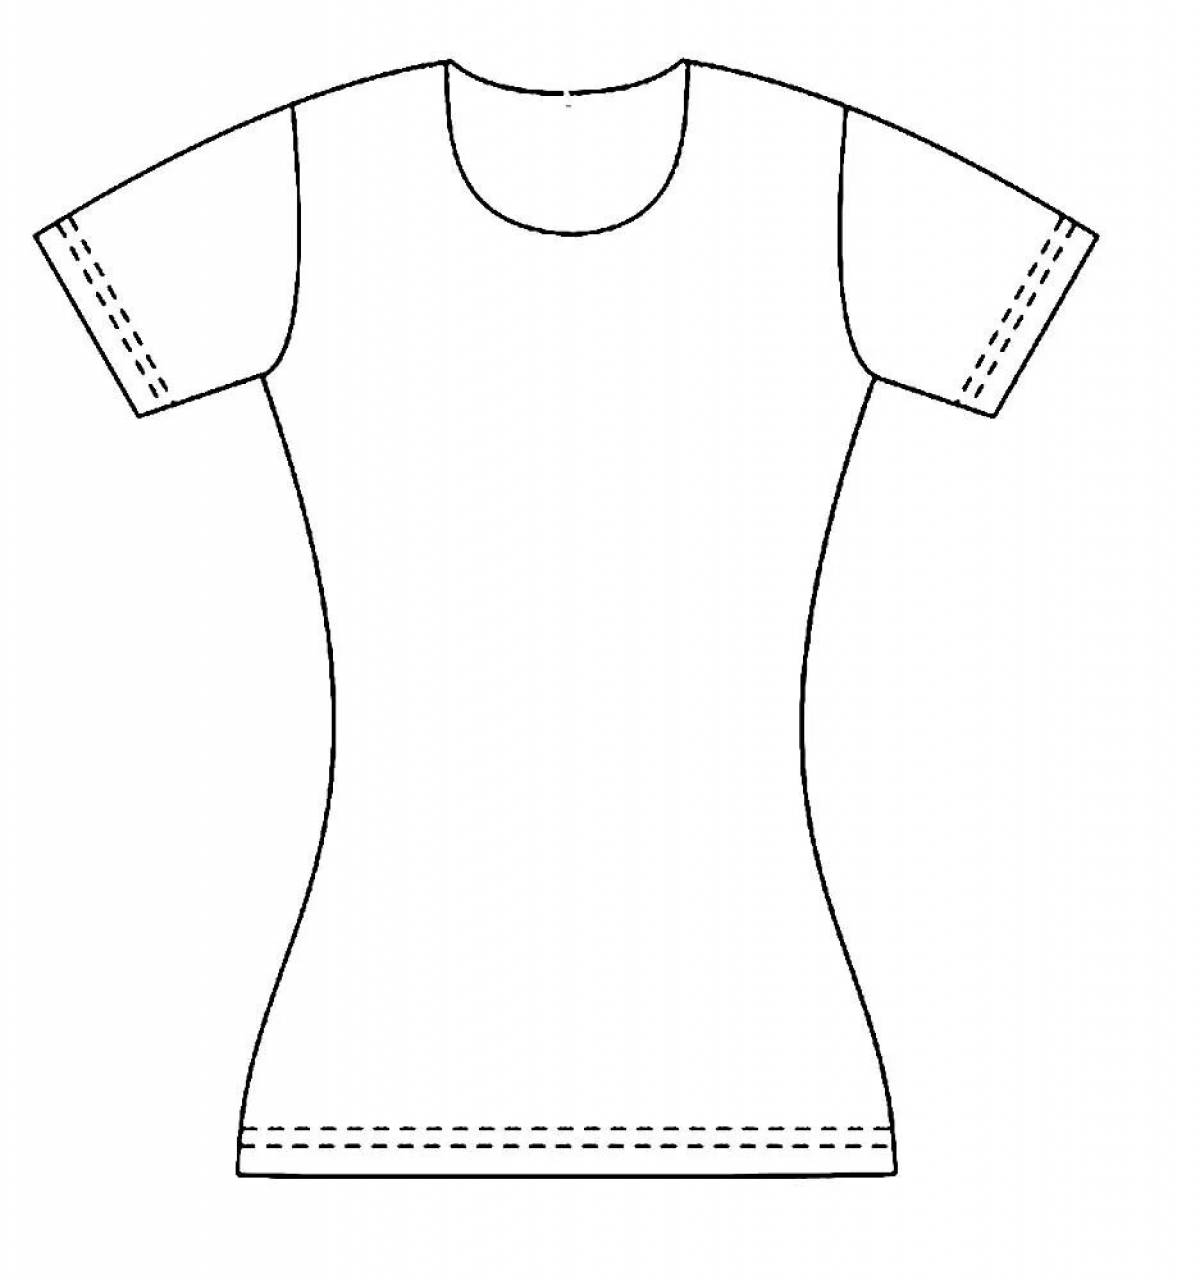 Colorful t-shirt coloring page for kids to develop skills